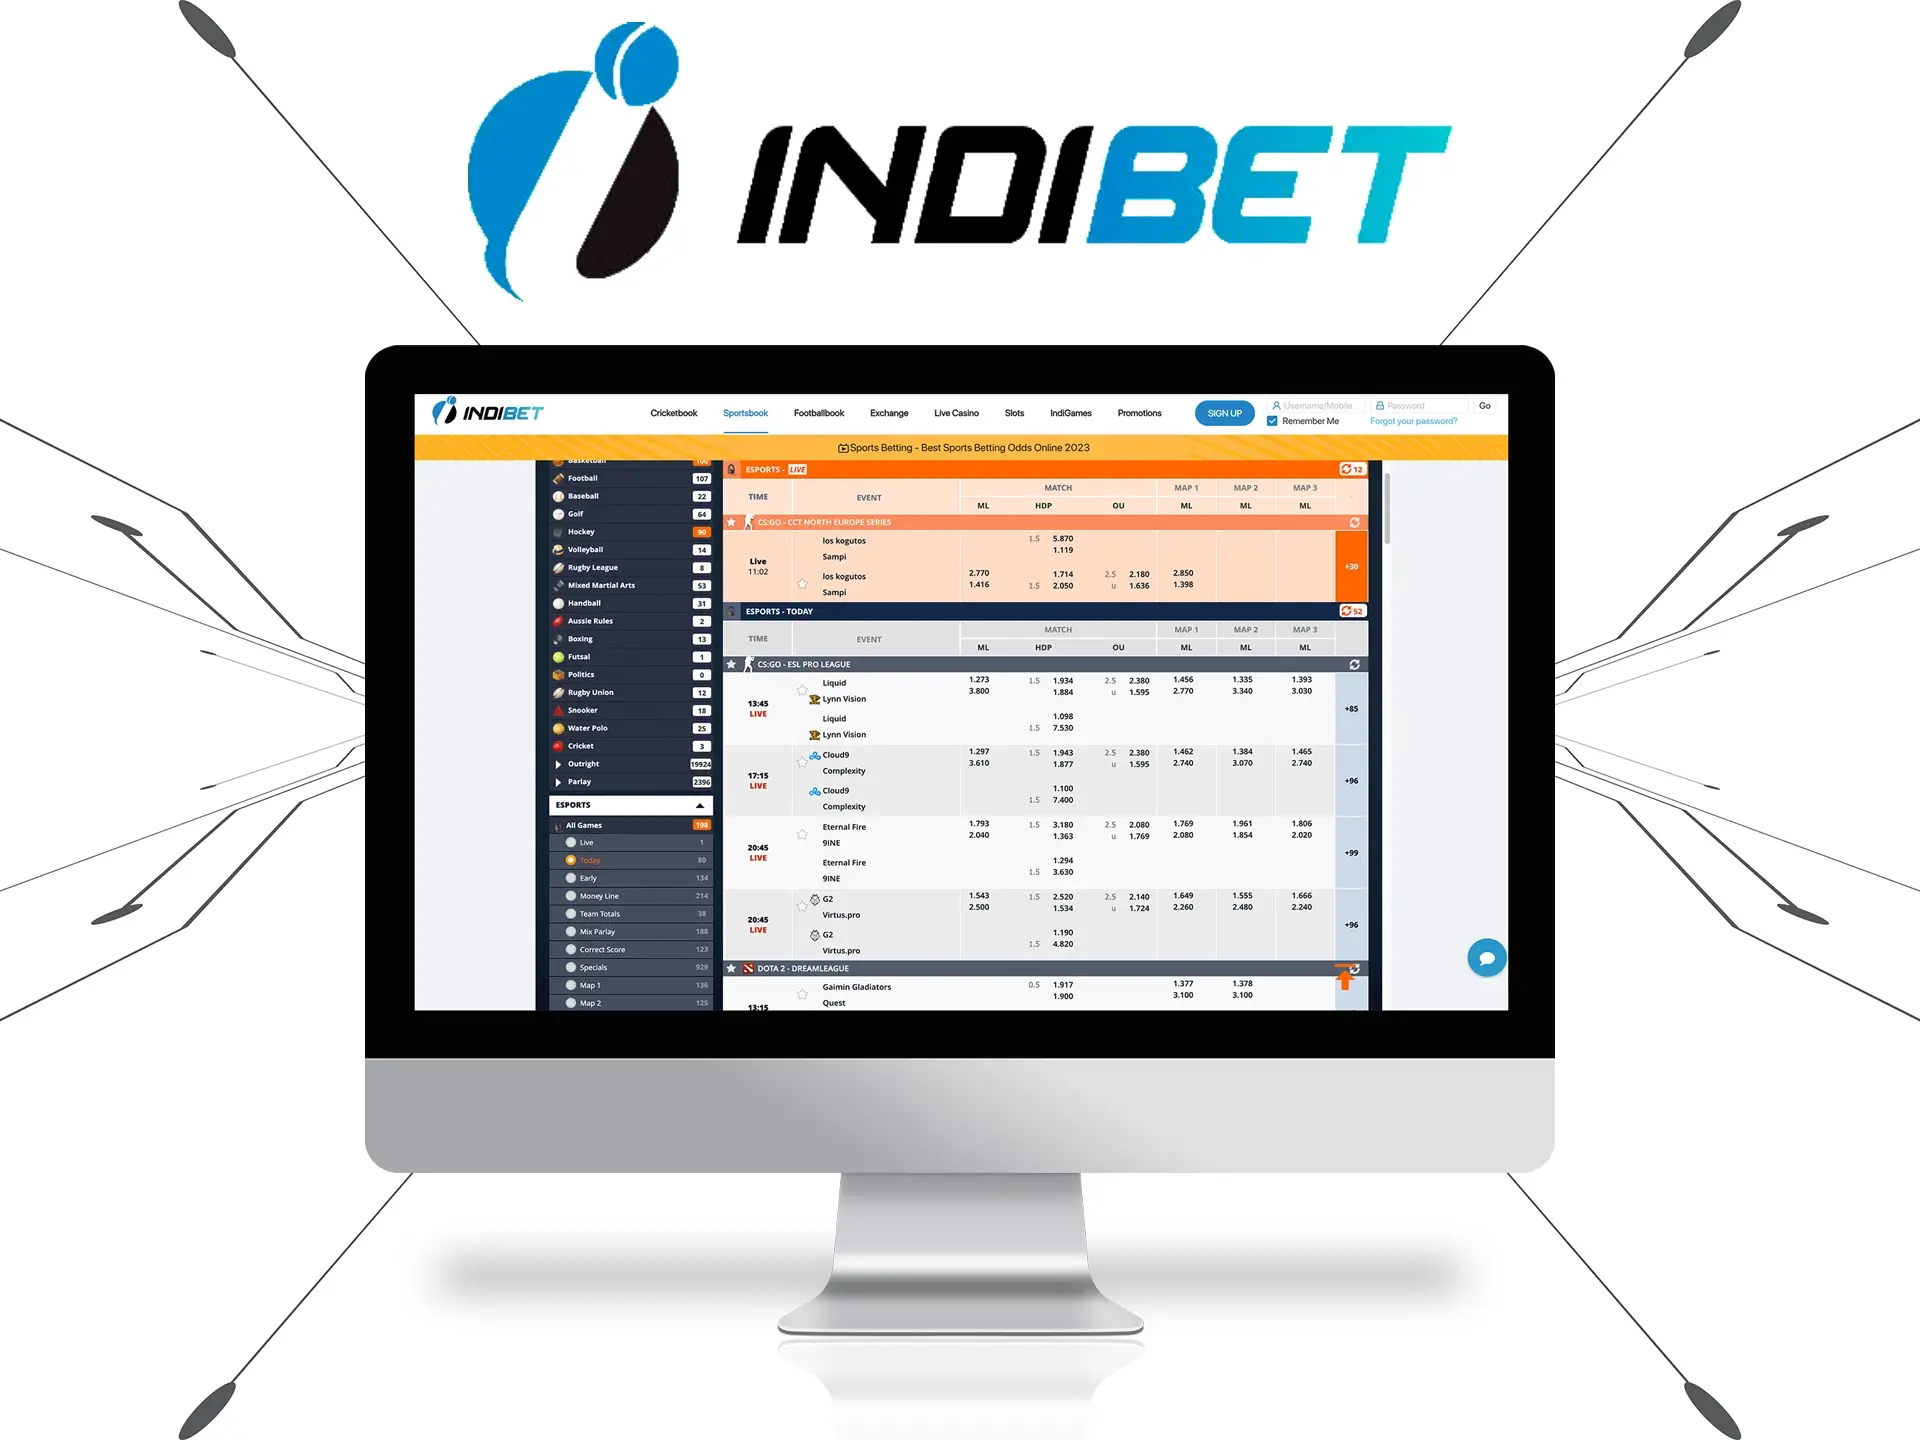 Indibet is renowned for its convenience and variety of esports.